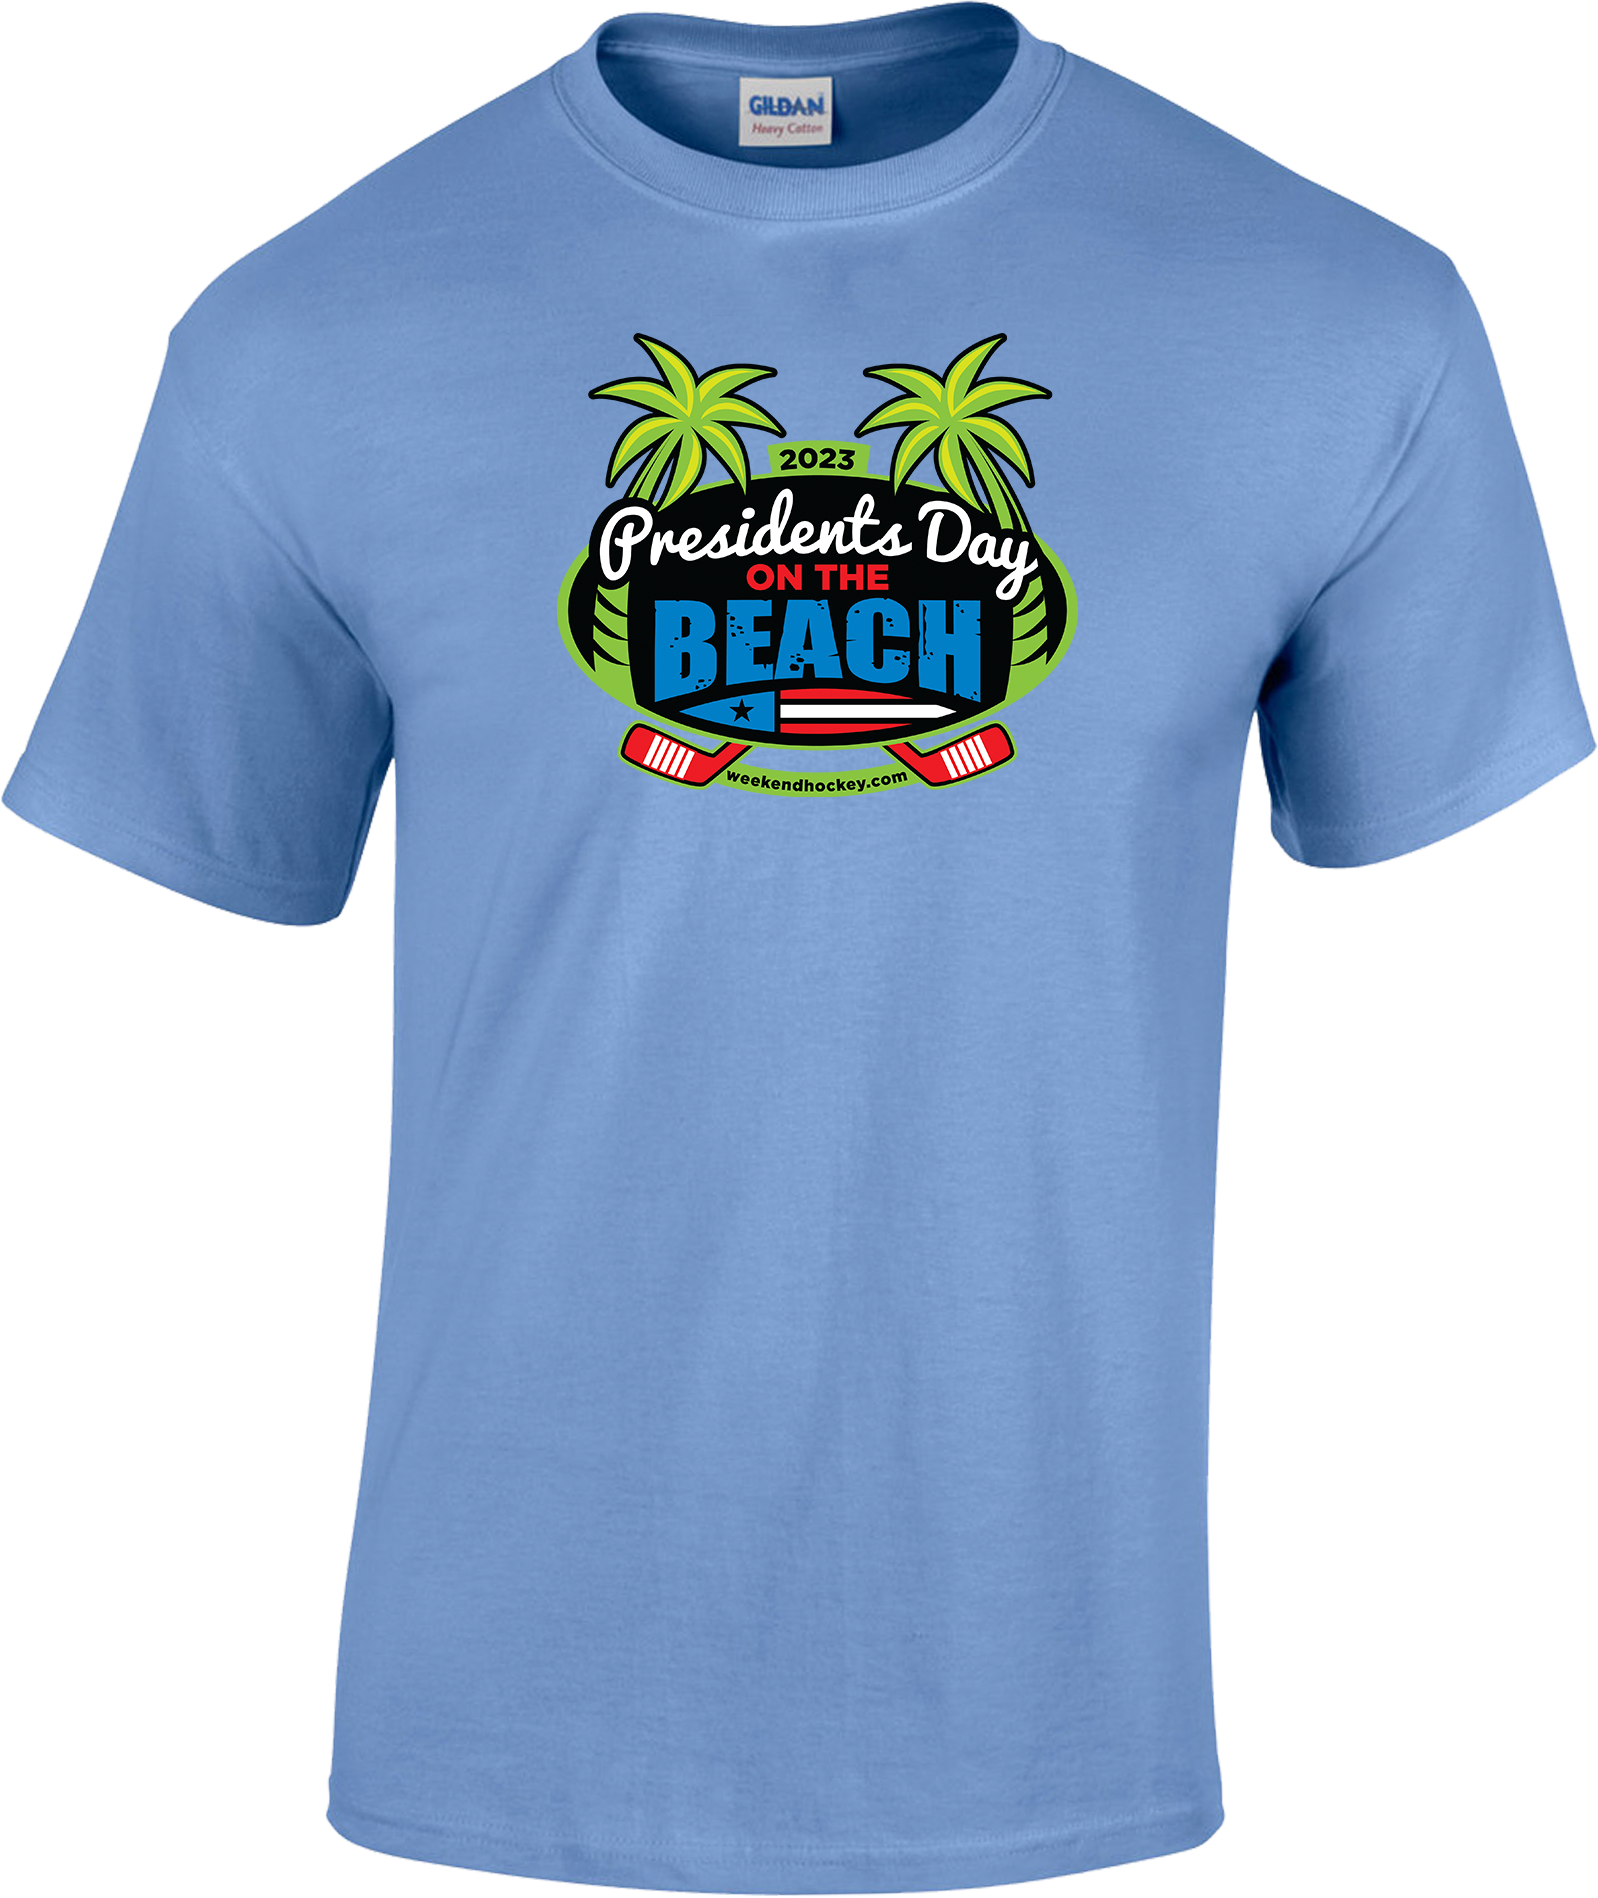 SHORT SLEEVES - 2023 Presidents Day on the Beach